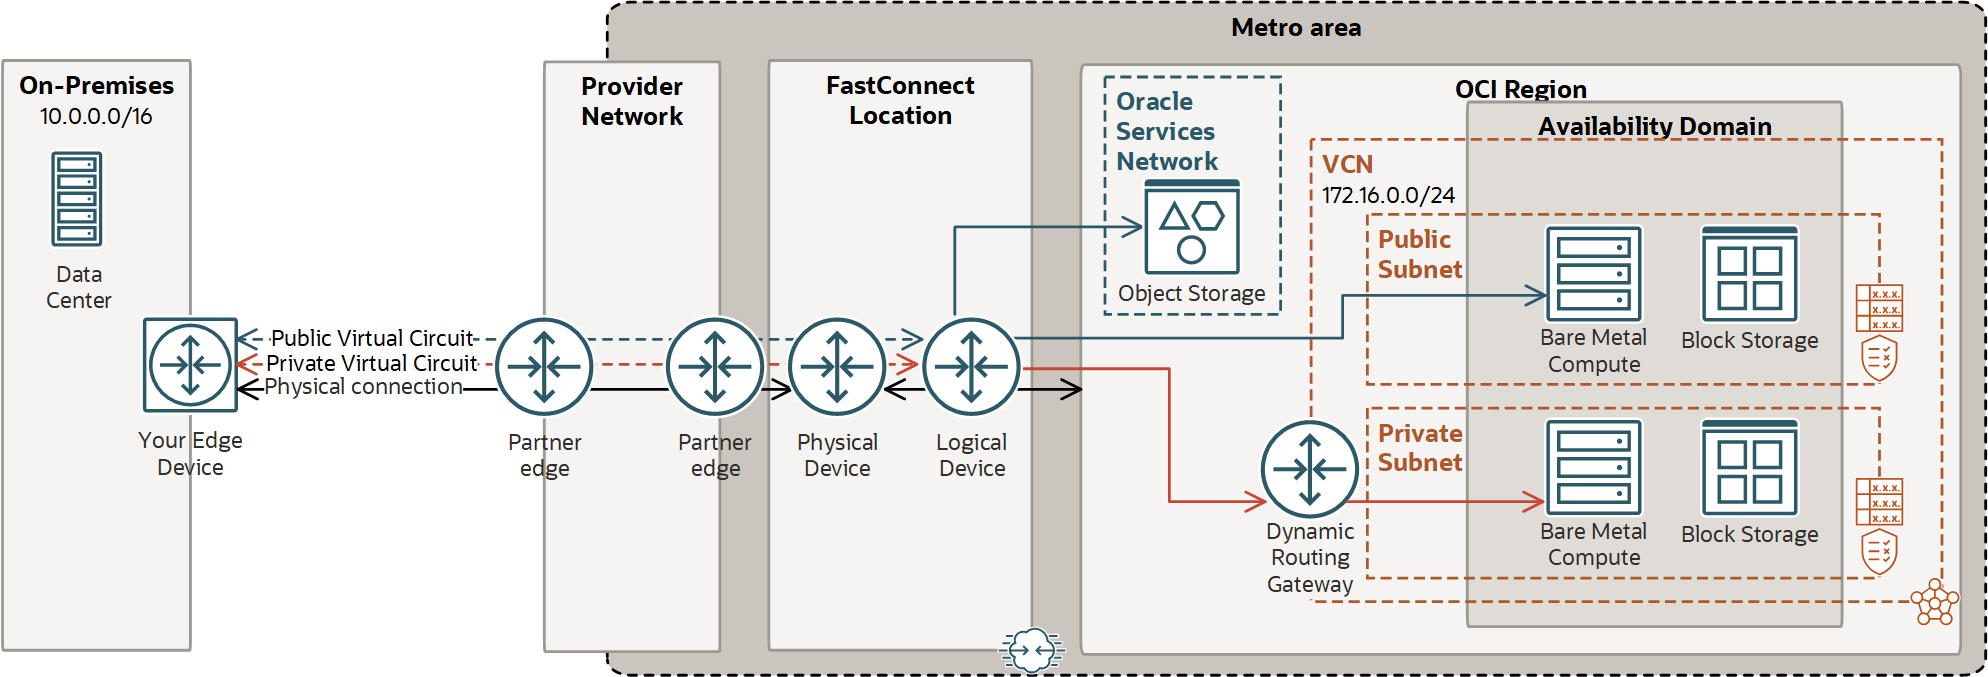 This image shows the provider scenario with a public virtual circuit